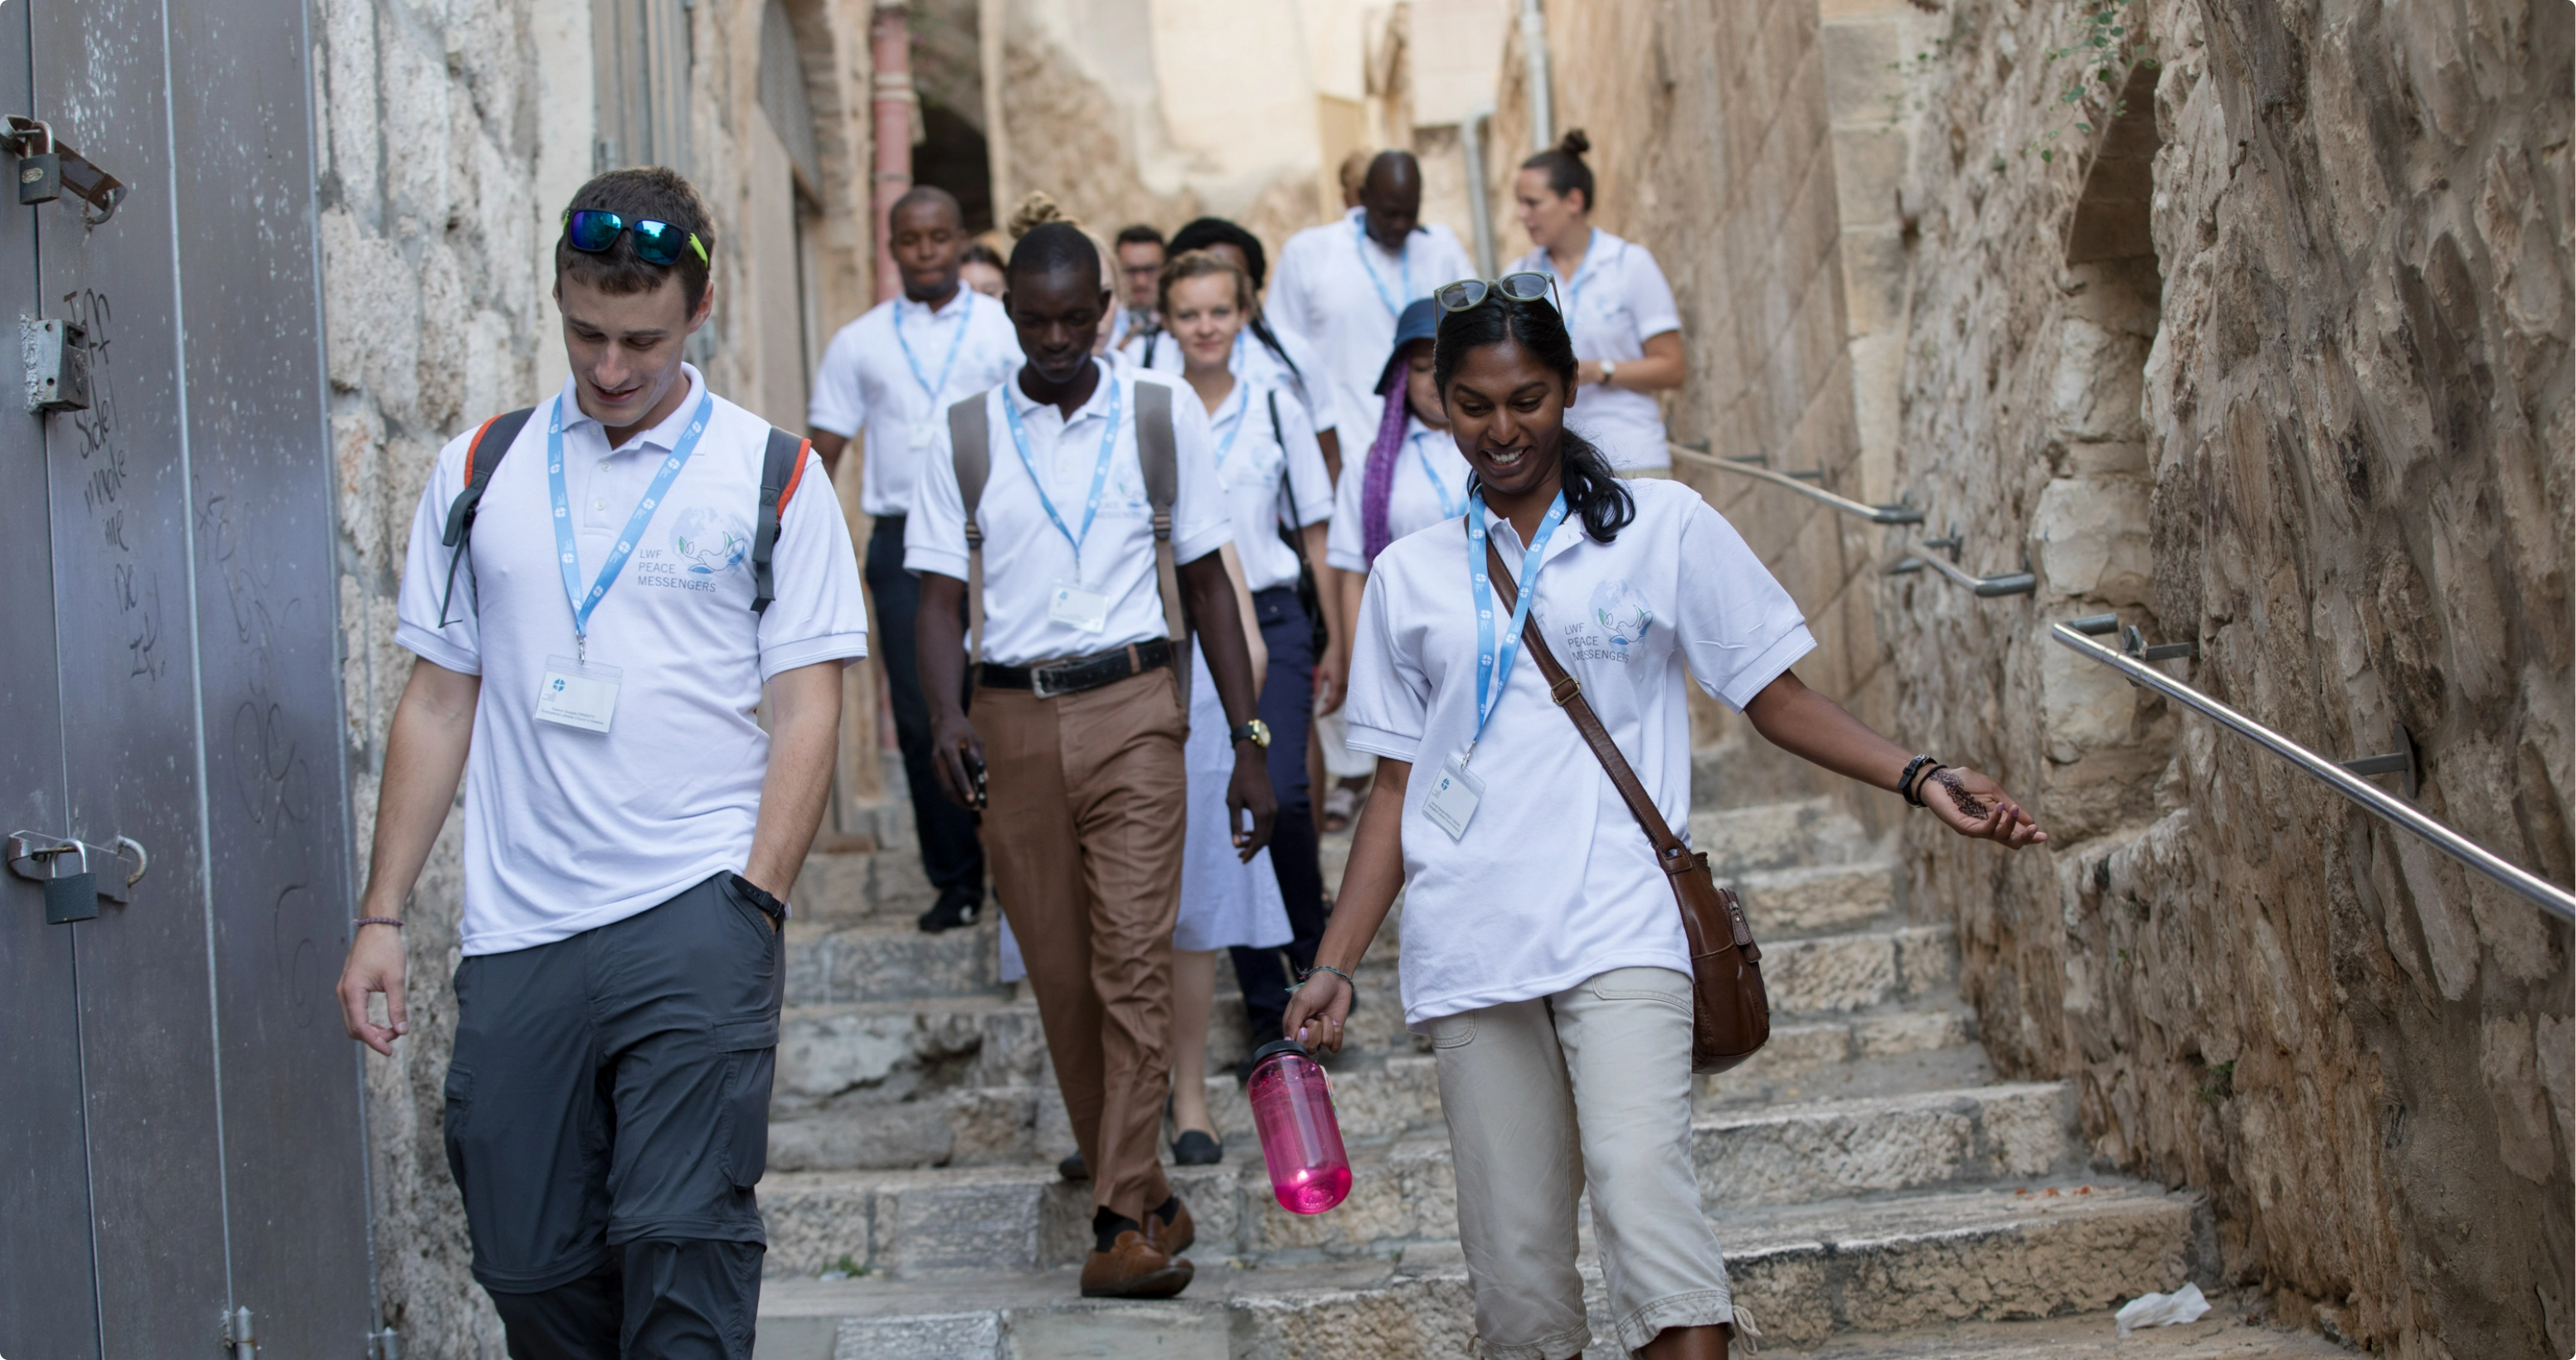 Participants in the LWF Peace Messenger Training gather at the start of the day Friday September 22, 2017 before touring Jerusalem. Photo: Ben Gray